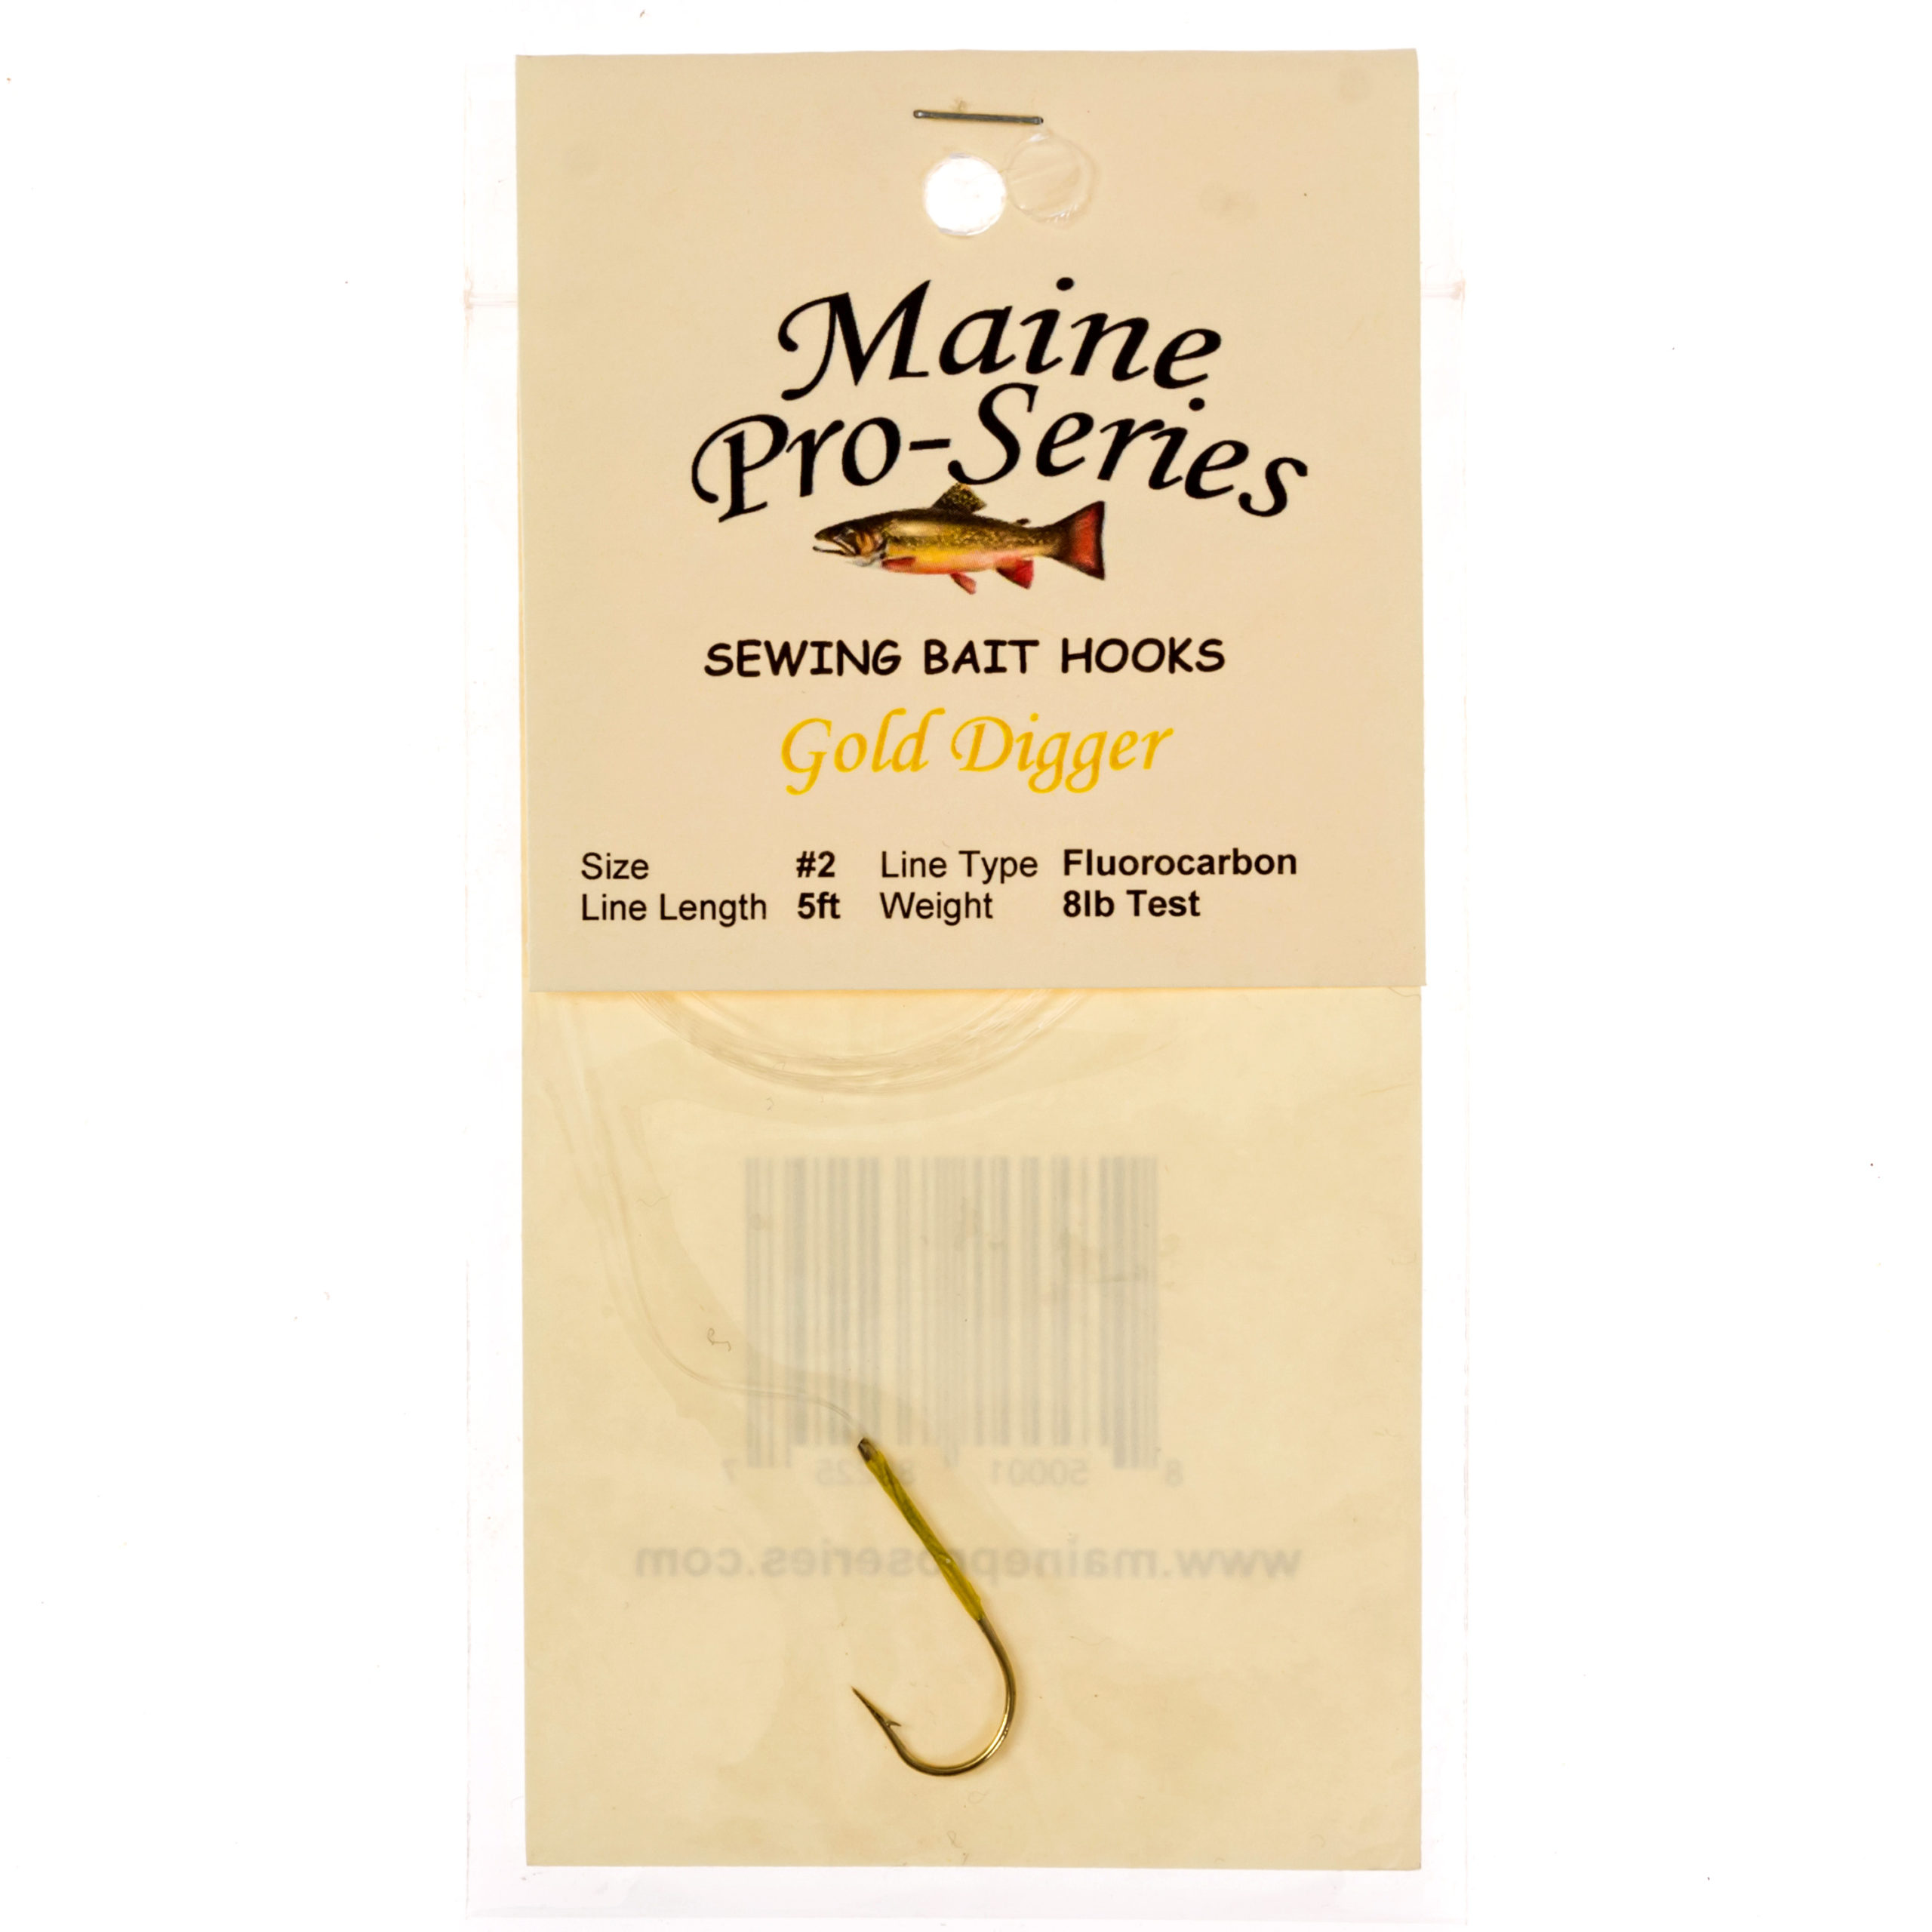 https://www.maineproseries.com/wp-content/uploads/2020/01/sewing-bait-hook-leader-package-gold-digger-scaled.jpg